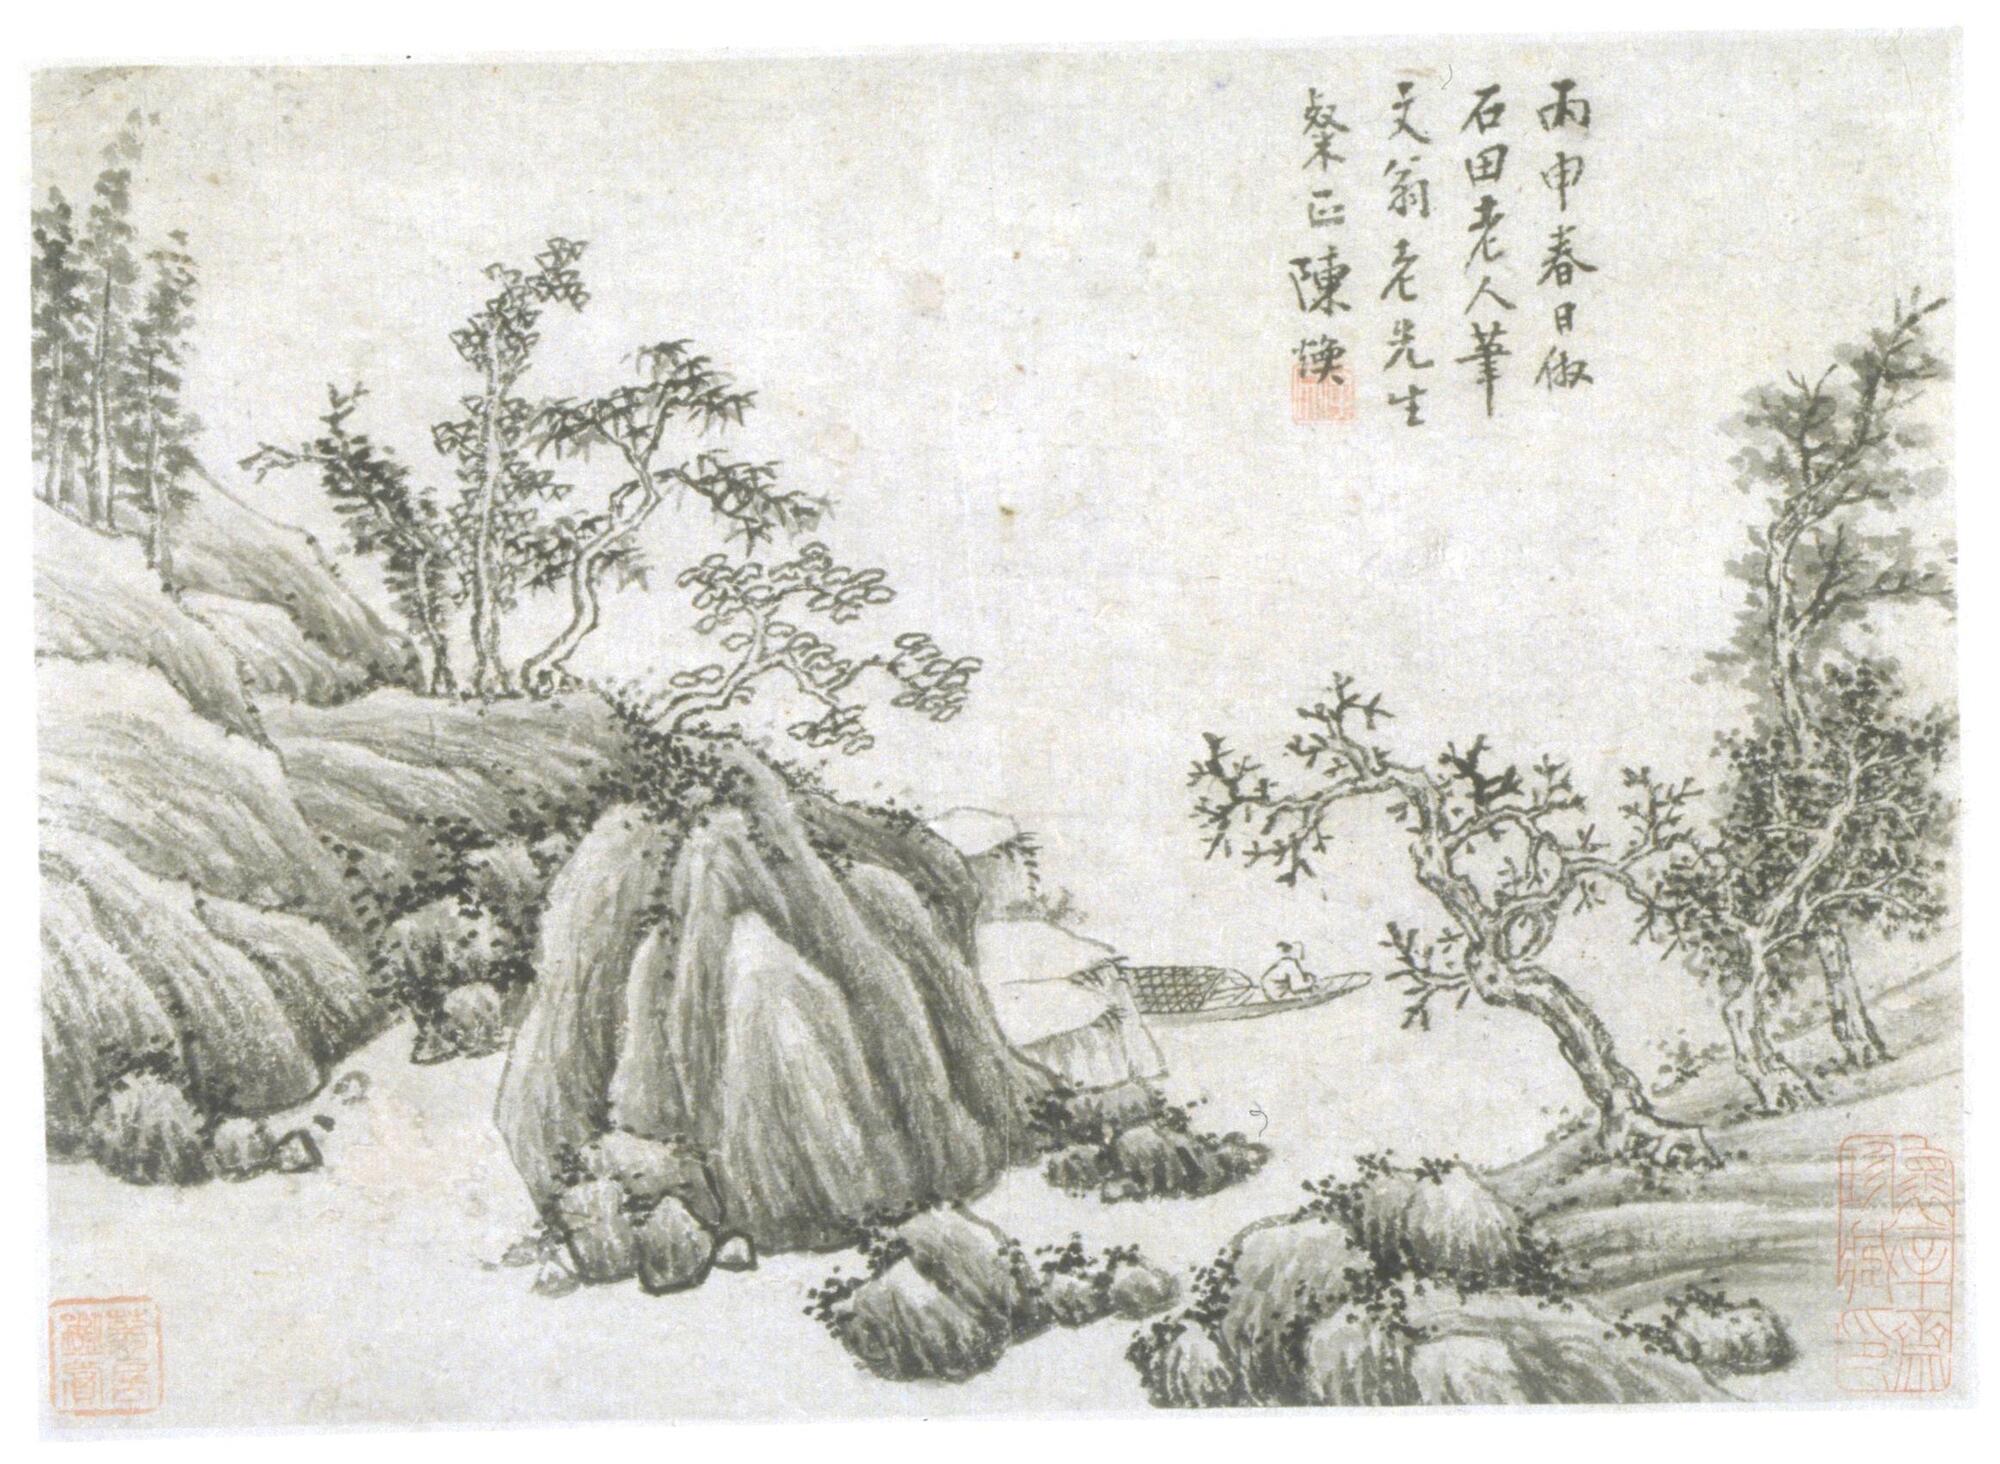 A lone boatman appears from behing the rocks, looking forward. Above him and slightl foregrounded arches a tree, and behind him lay a series of trees and rocks. Black dots are used to accent the rocks, and repeating patterns indicate leaves on trees. Red seals are in the lower left and lower right corners, and a third is at the end of the block of calligraphic text at top right.